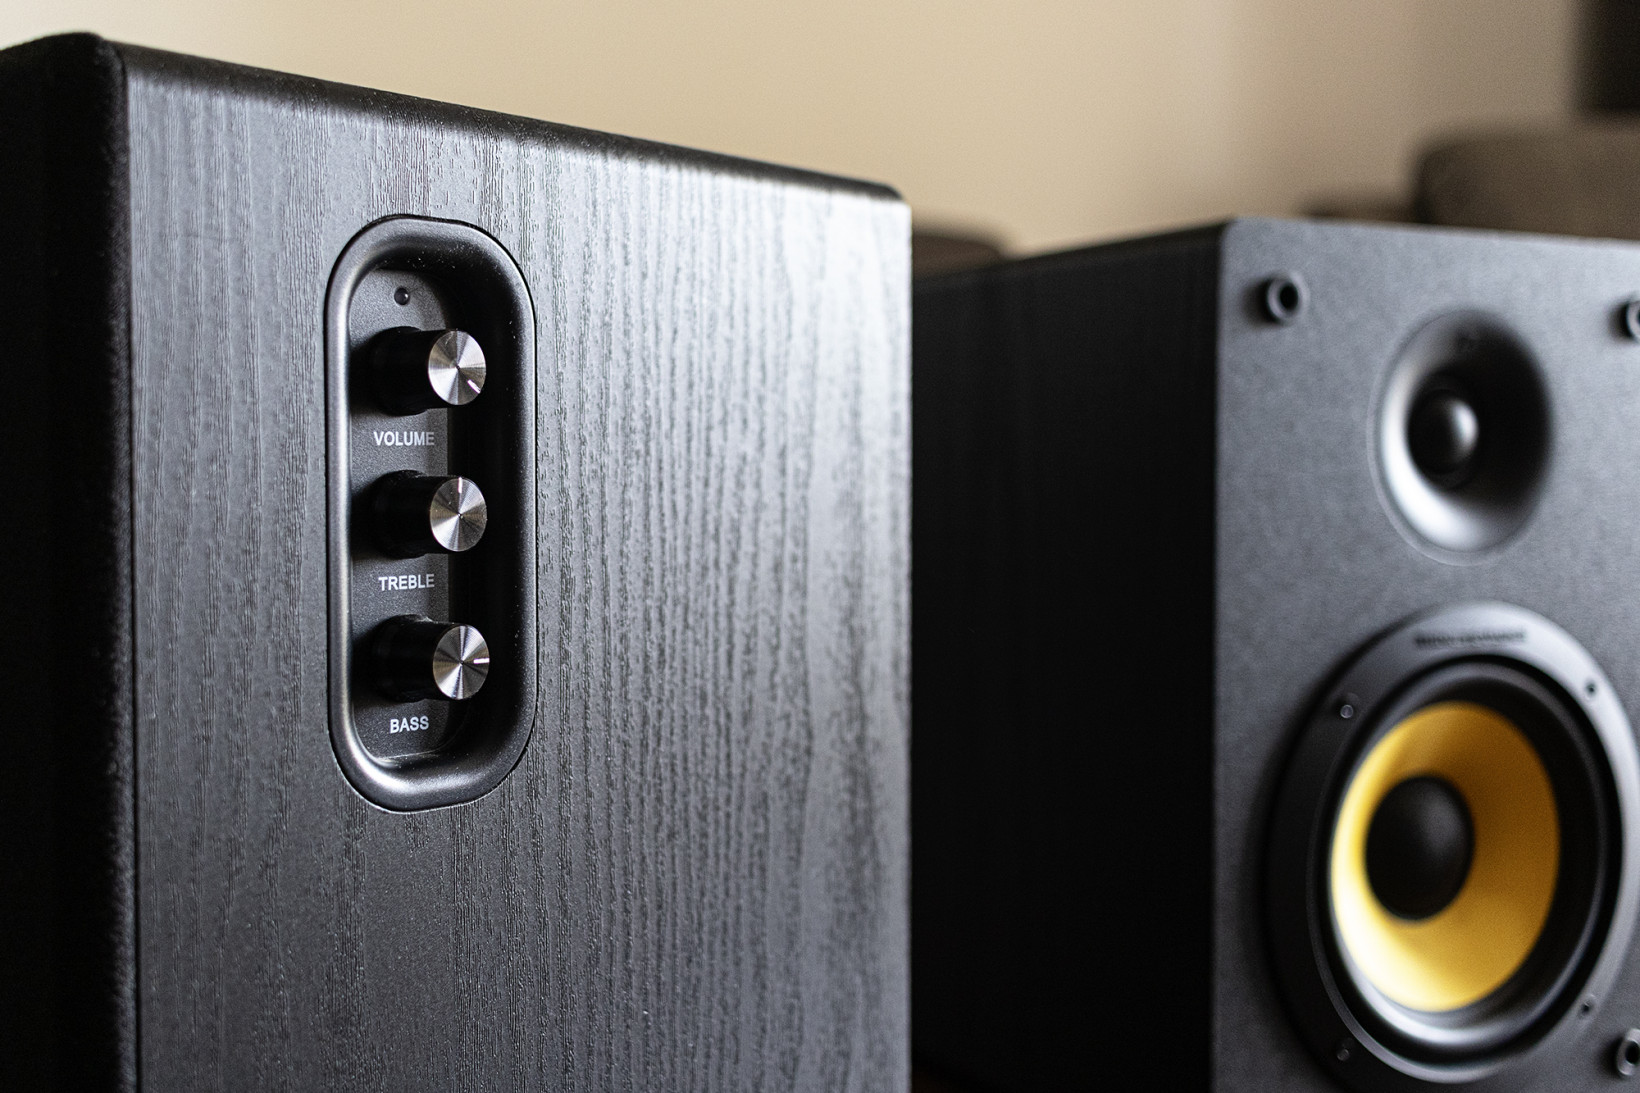 You'll definitely want to tweak the EQ on the Kubris speakers to suit your taste